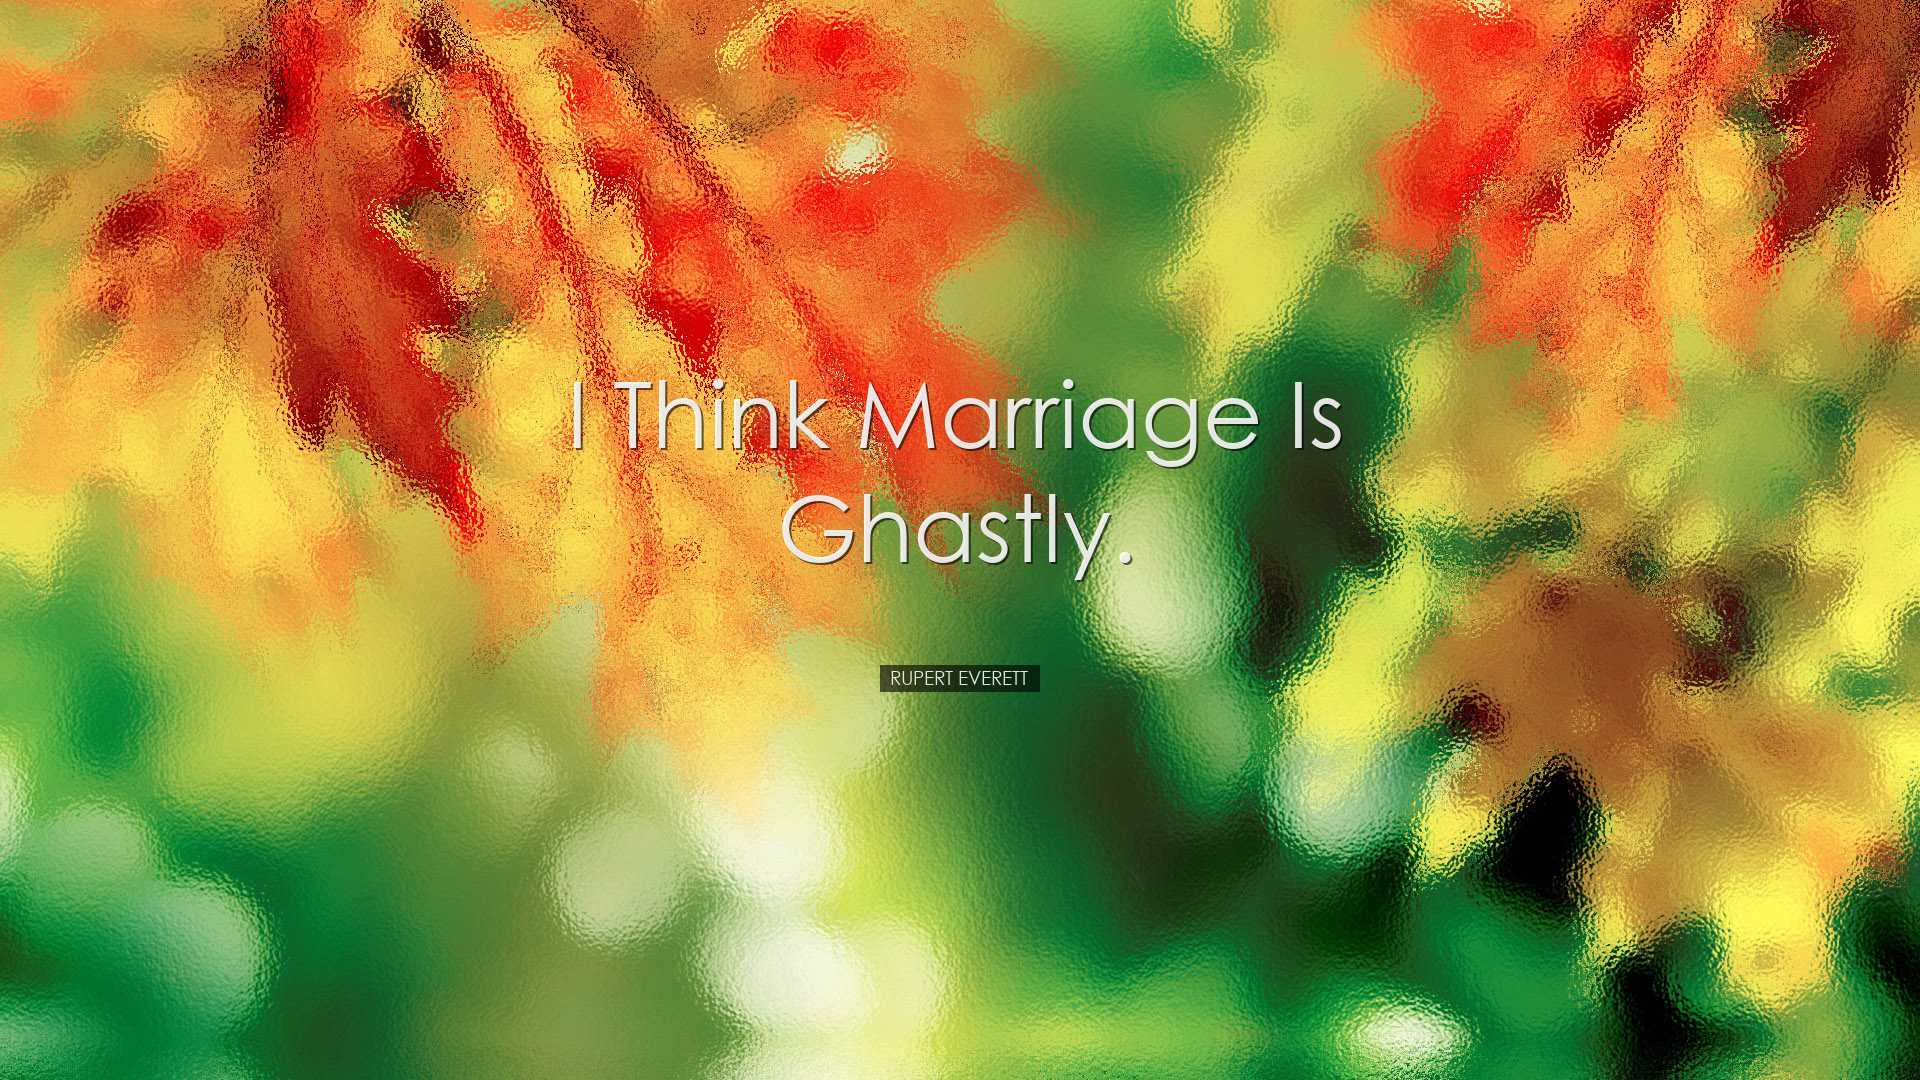 I think marriage is ghastly. - Rupert Everett